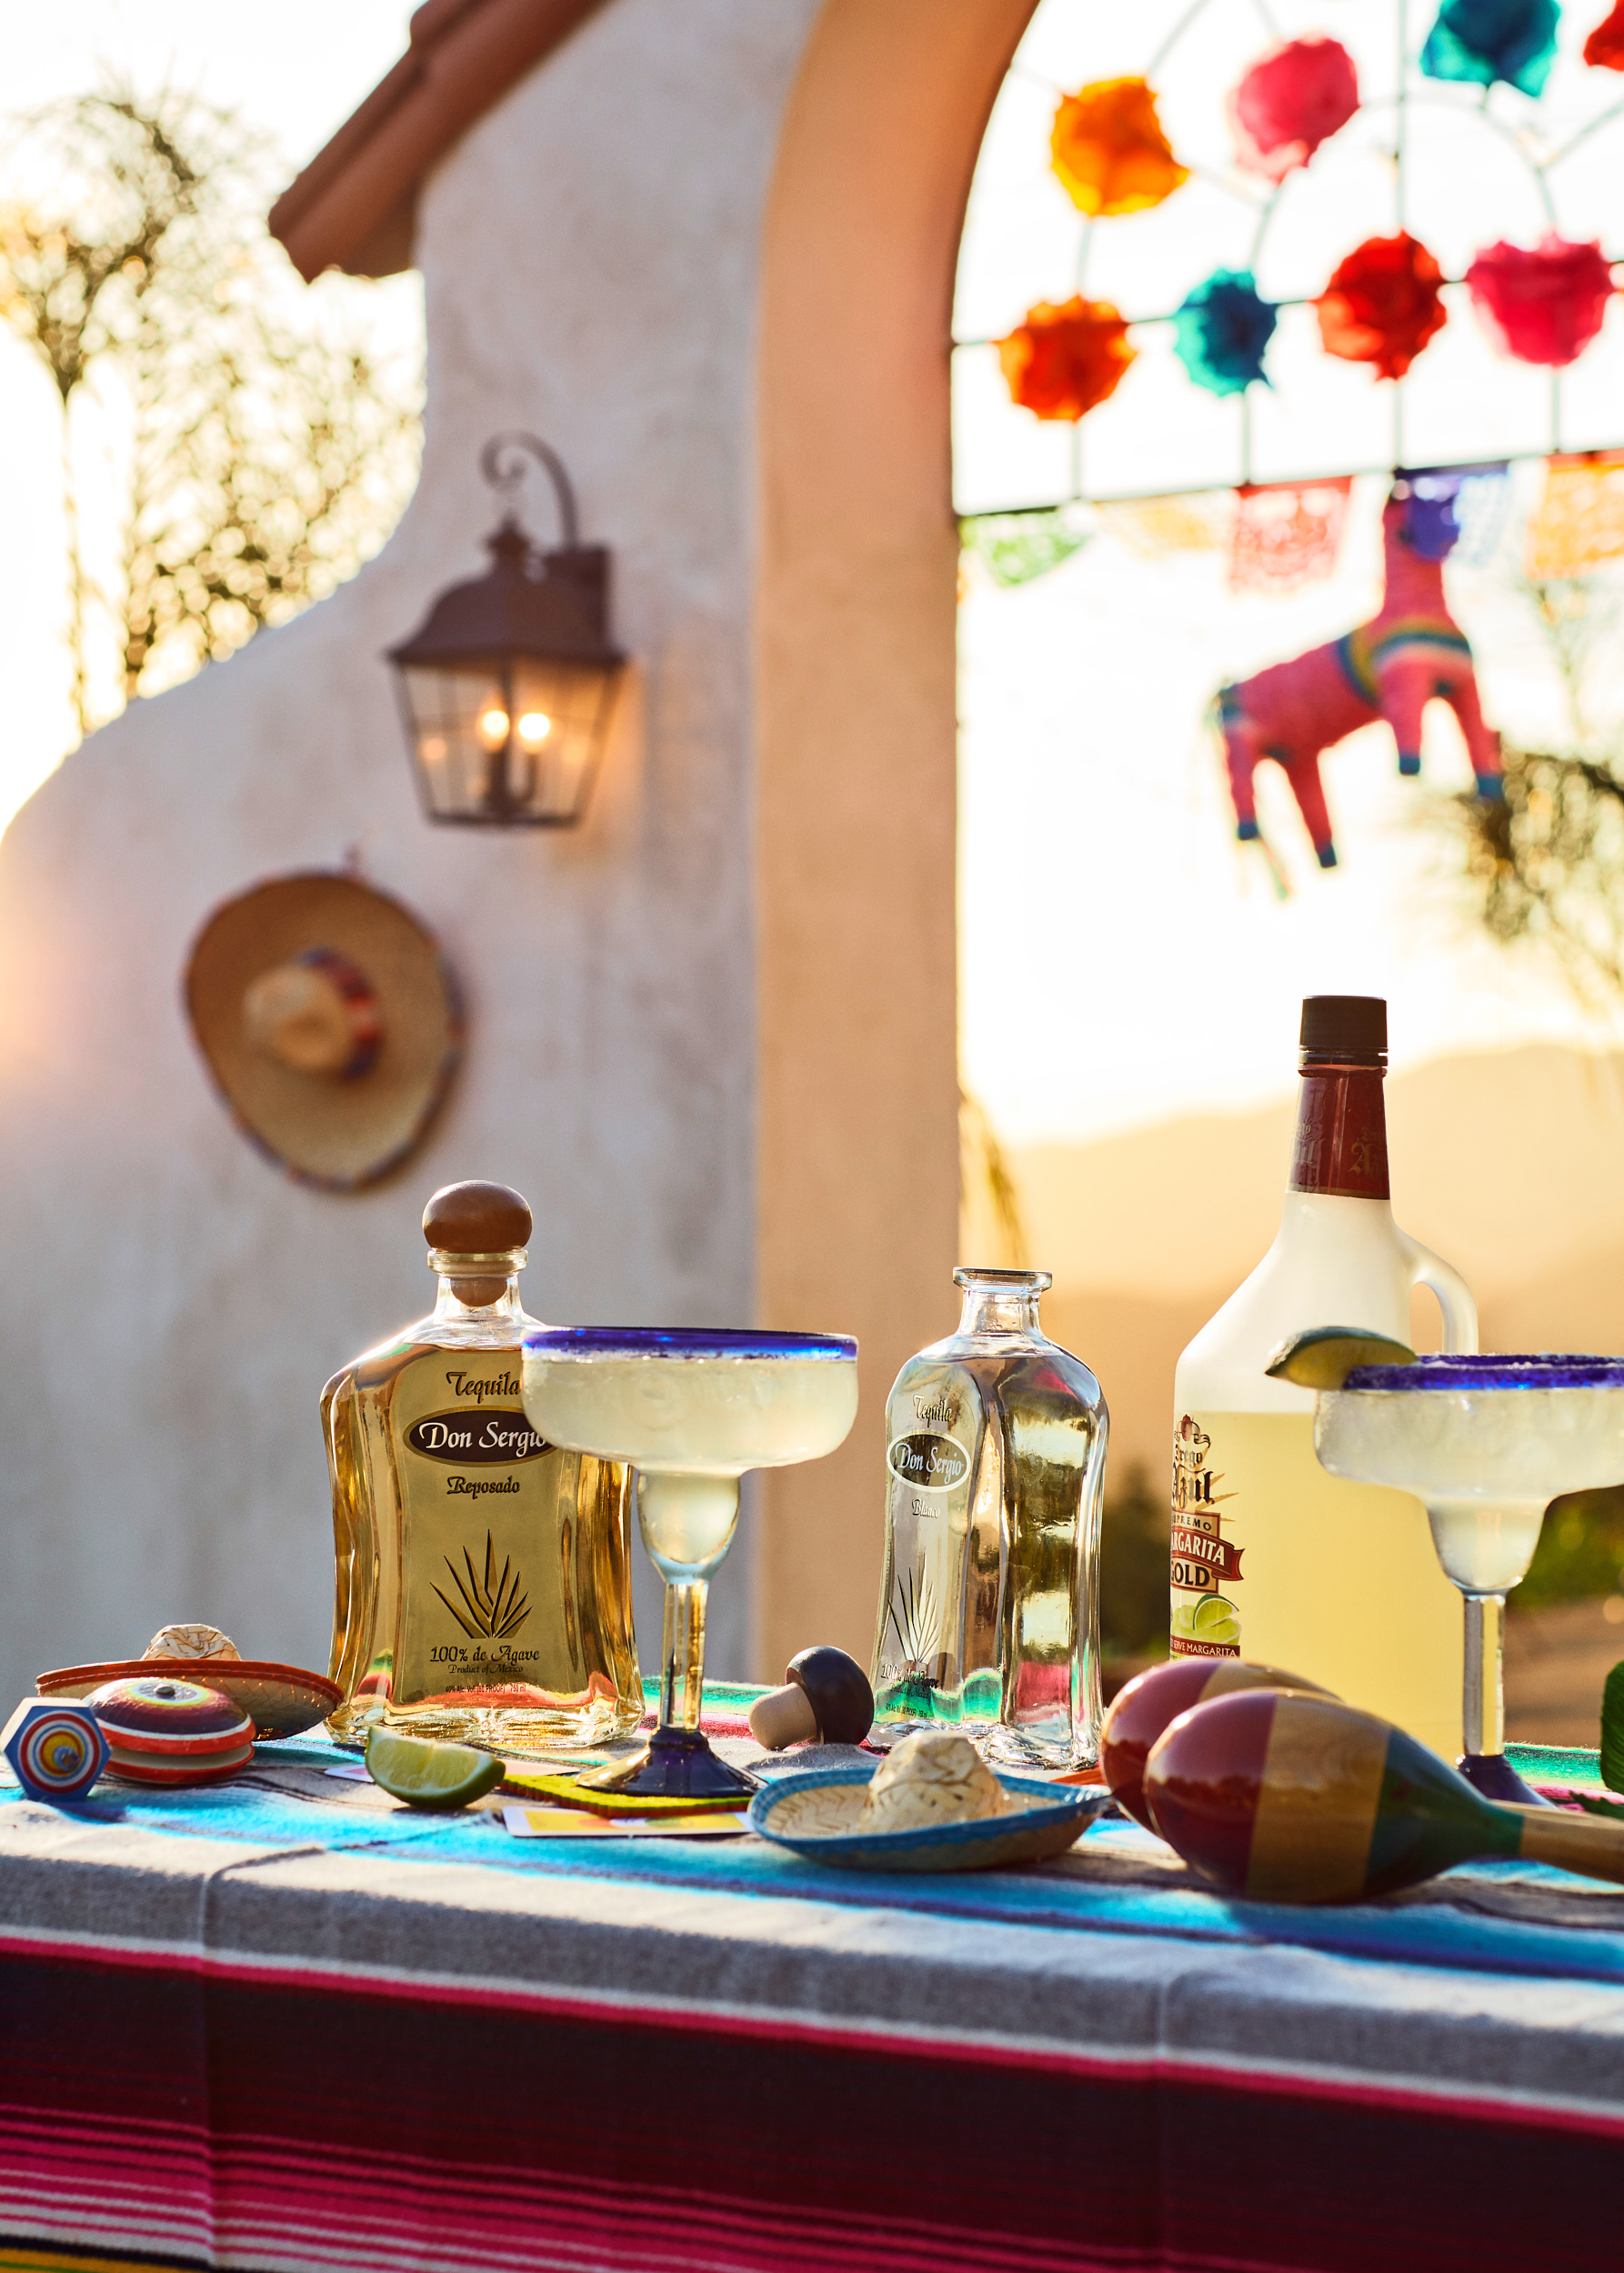 Margarita bar at an outdoor party. Celebrating at a Spanish style home.